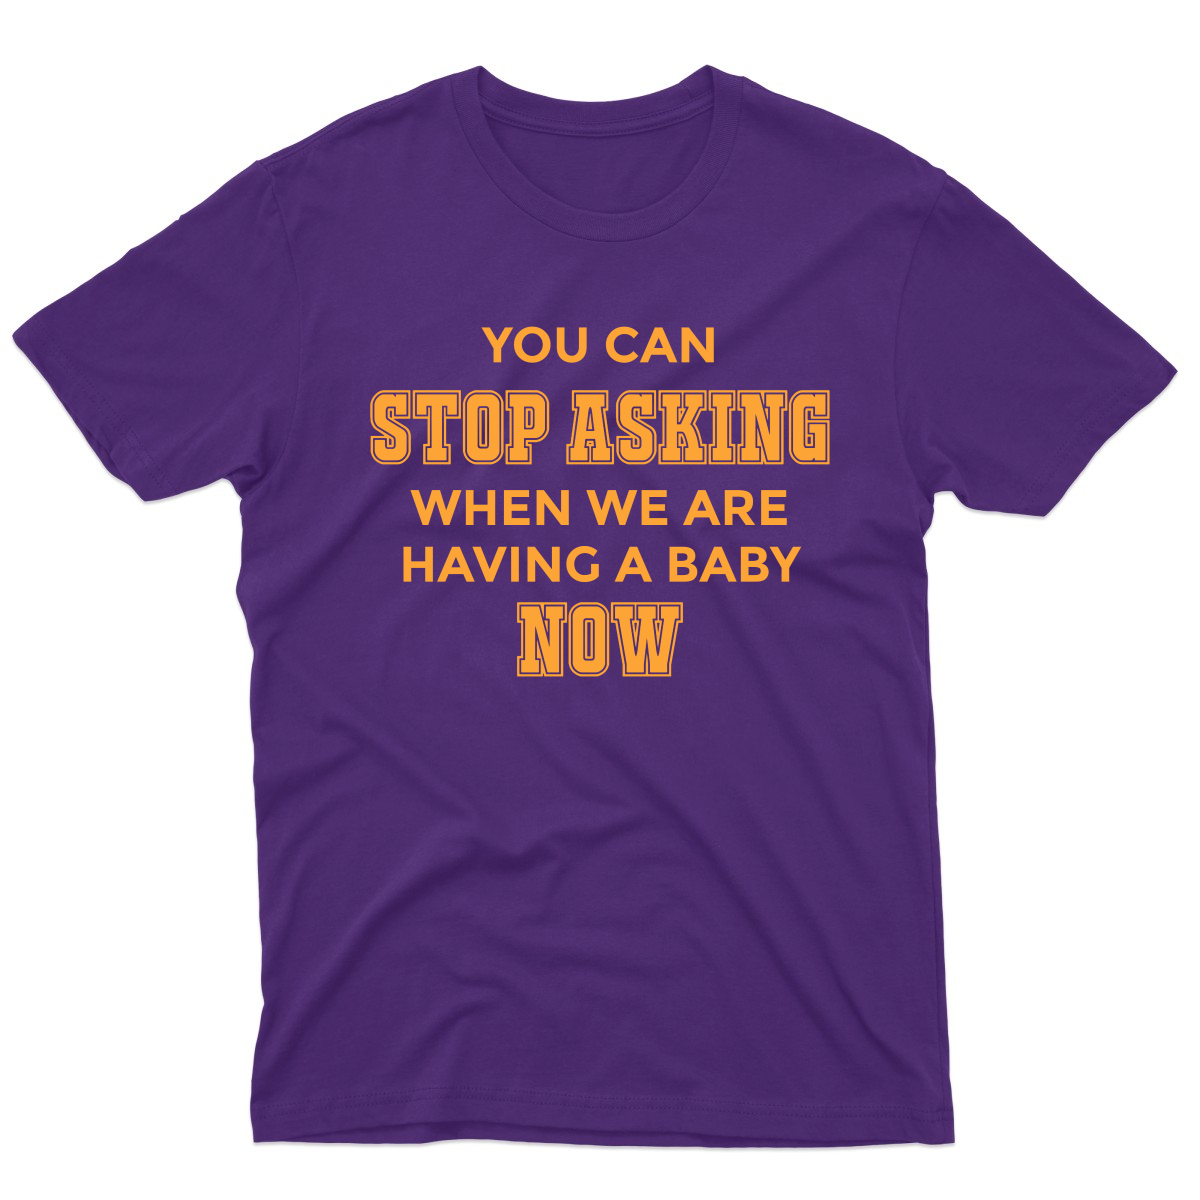 You can stop asking when we are having baby NOW Men's T-shirt | Purple